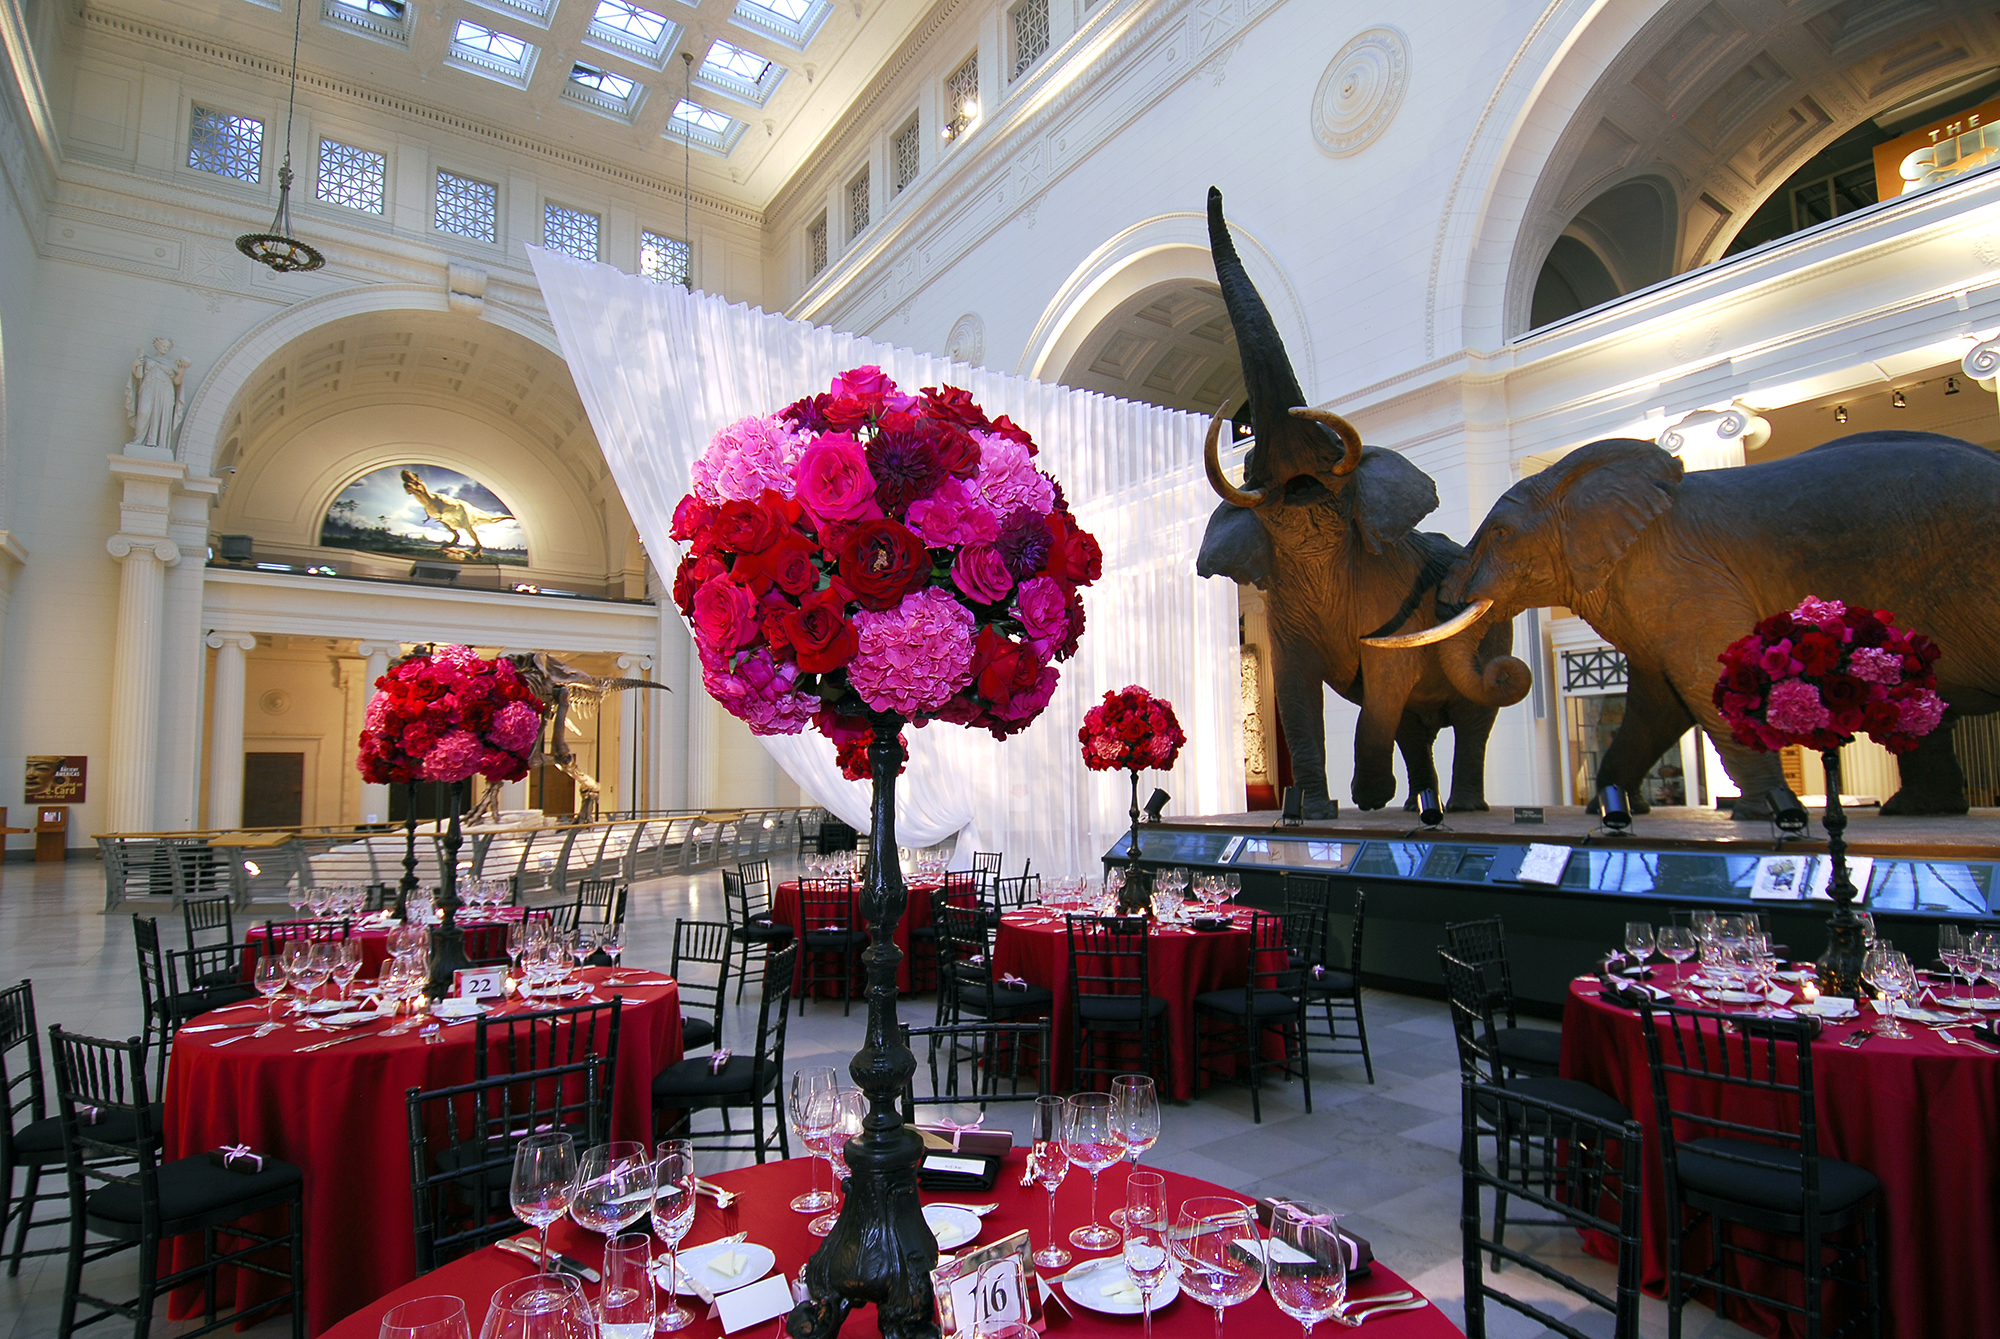 Circular tables covered with red table cloths and pink and red floral arrangements are set up in Stanley Field Hall. The taxidermied African elephants are visible beyond the tables.